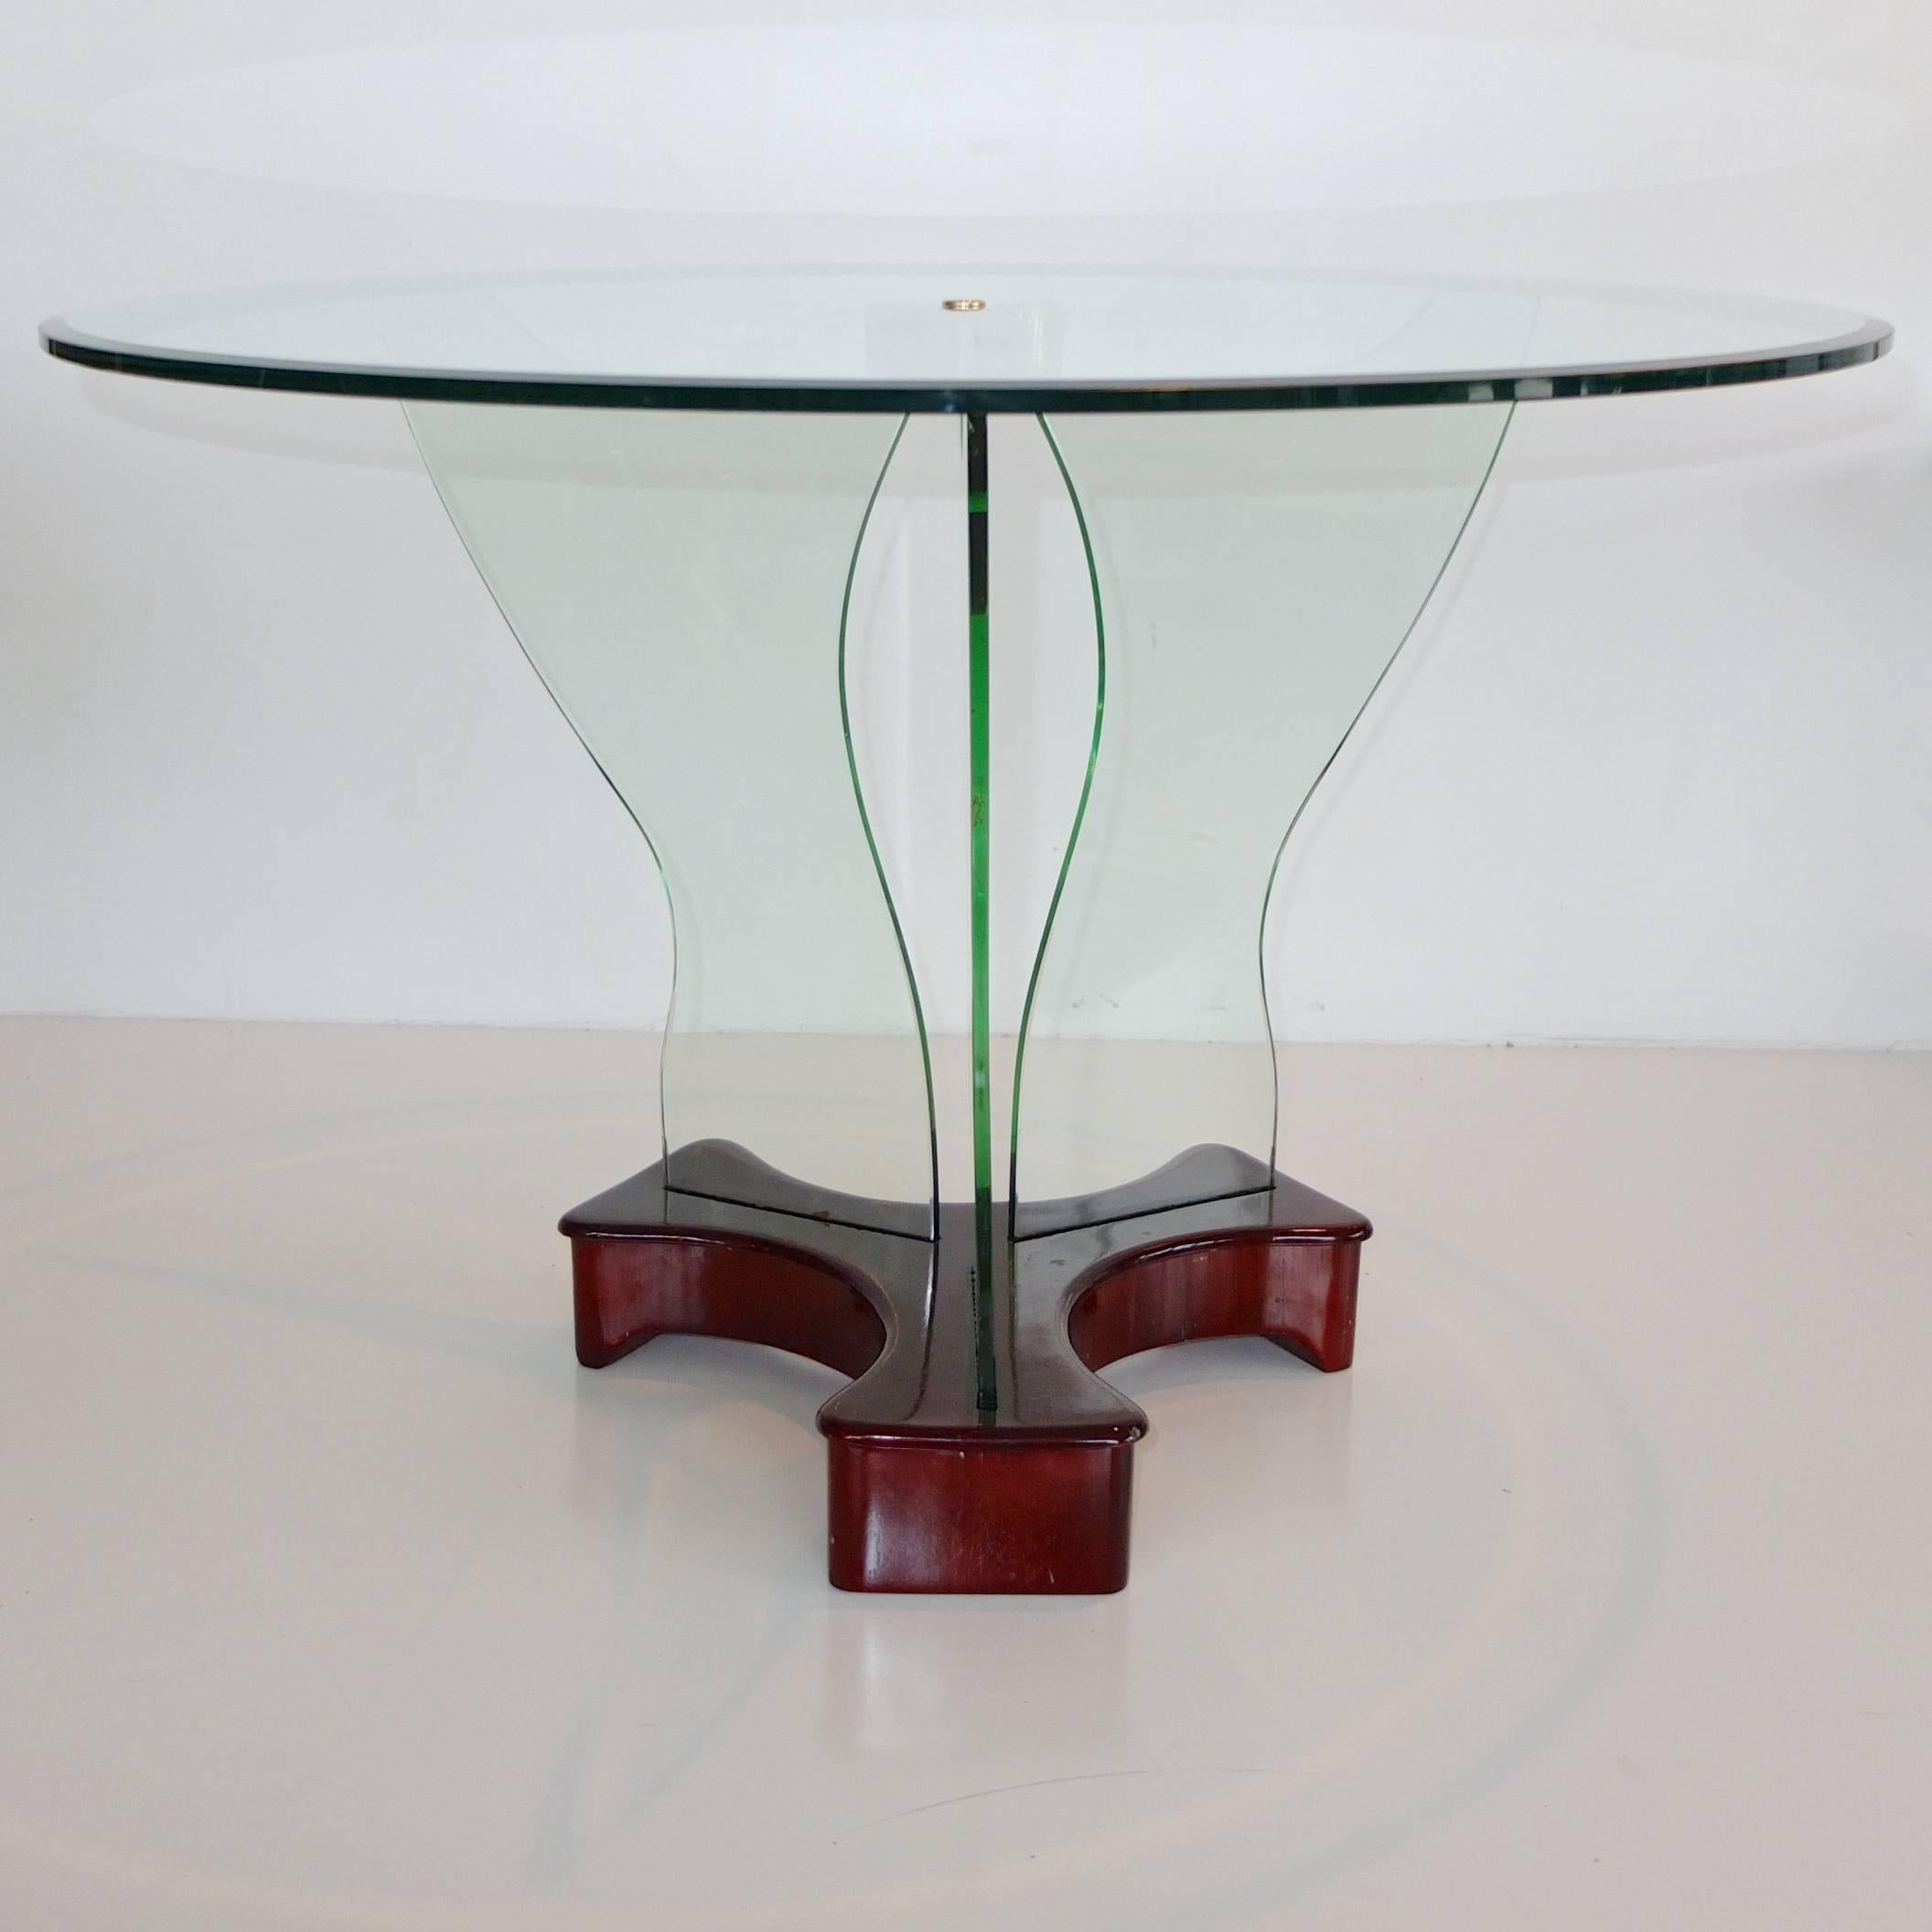 Luigi Brusotti 1930s Glass, Brass and Mahogany Cocktail Table For Sale 2